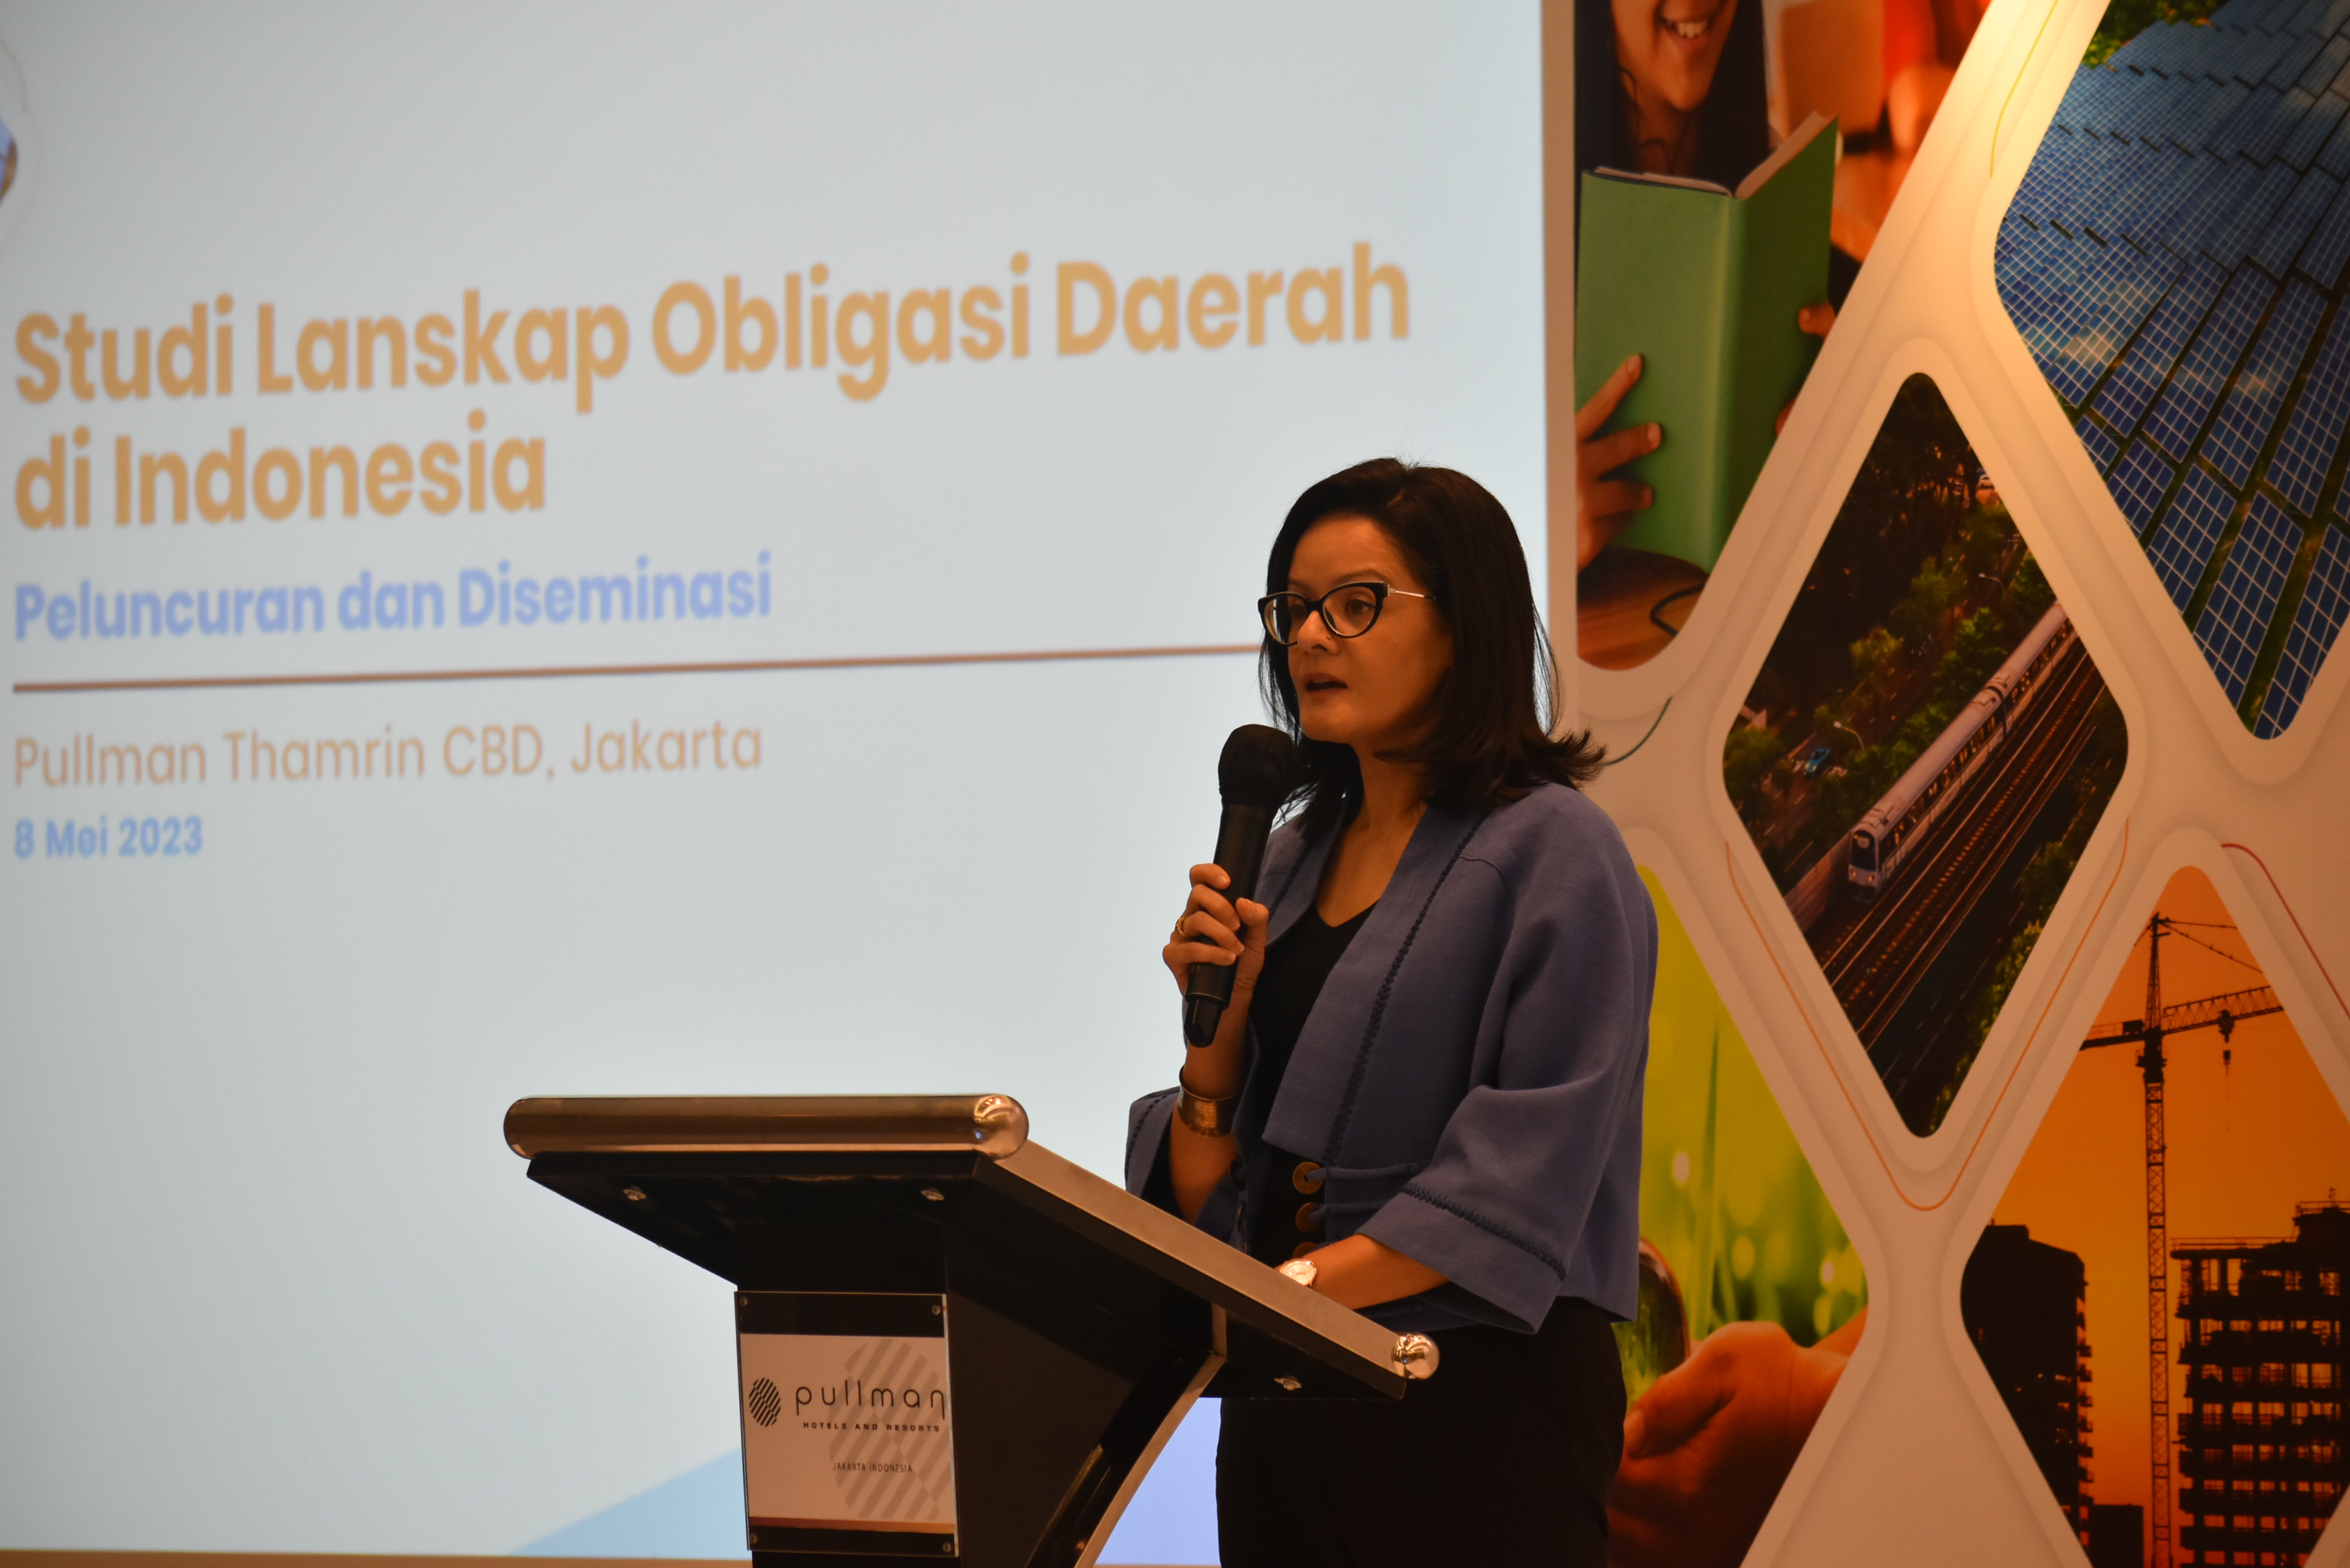 UNDP Indonesia has maximized the impact of thematic bond instruments at the national level and recognizes the potential for replication at the subnational level. 